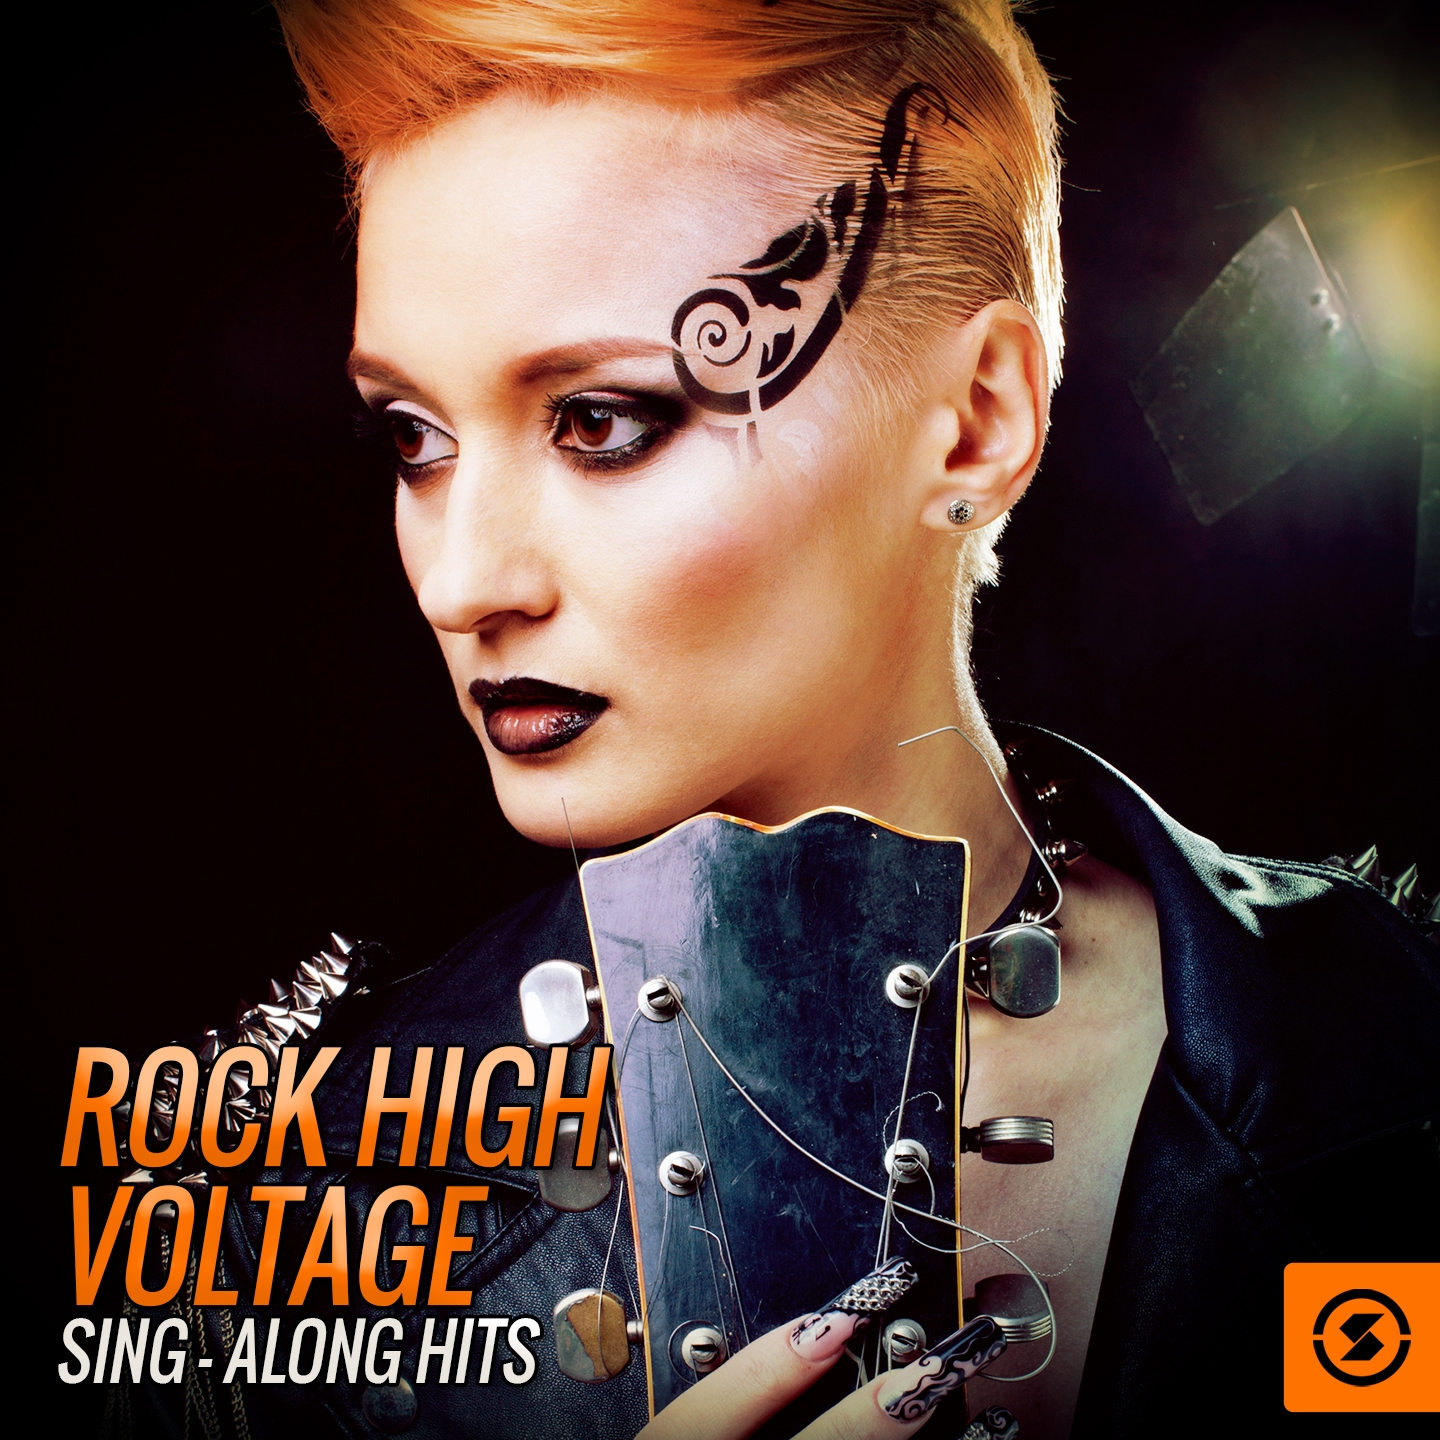 Rock High Voltage Sing - Along Hits